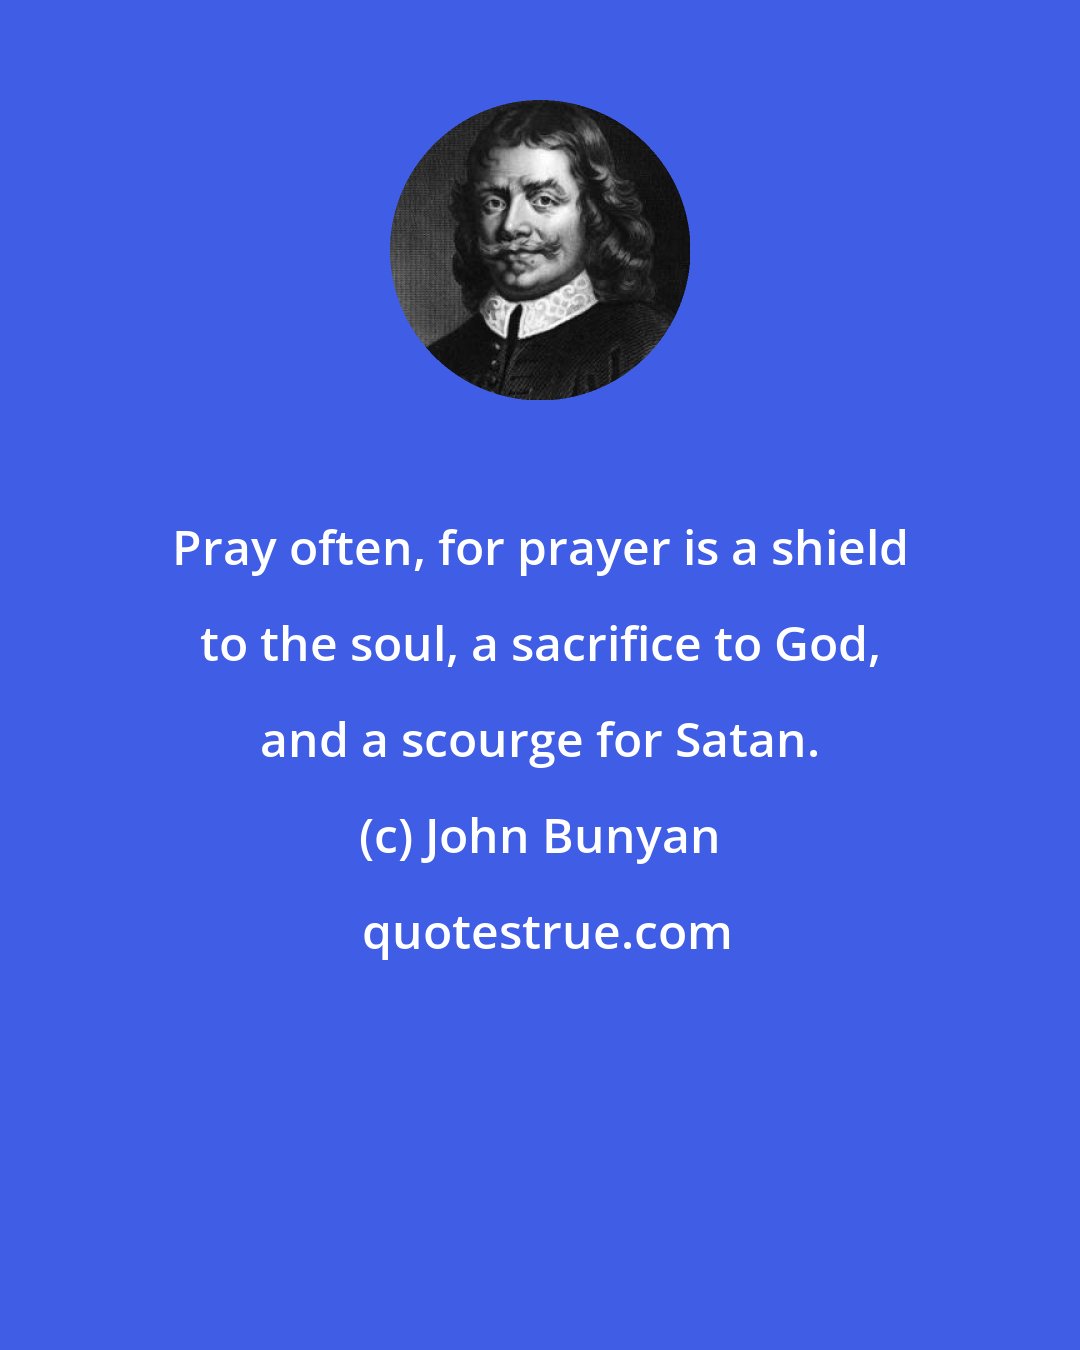 John Bunyan: Pray often, for prayer is a shield to the soul, a sacrifice to God, and a scourge for Satan.